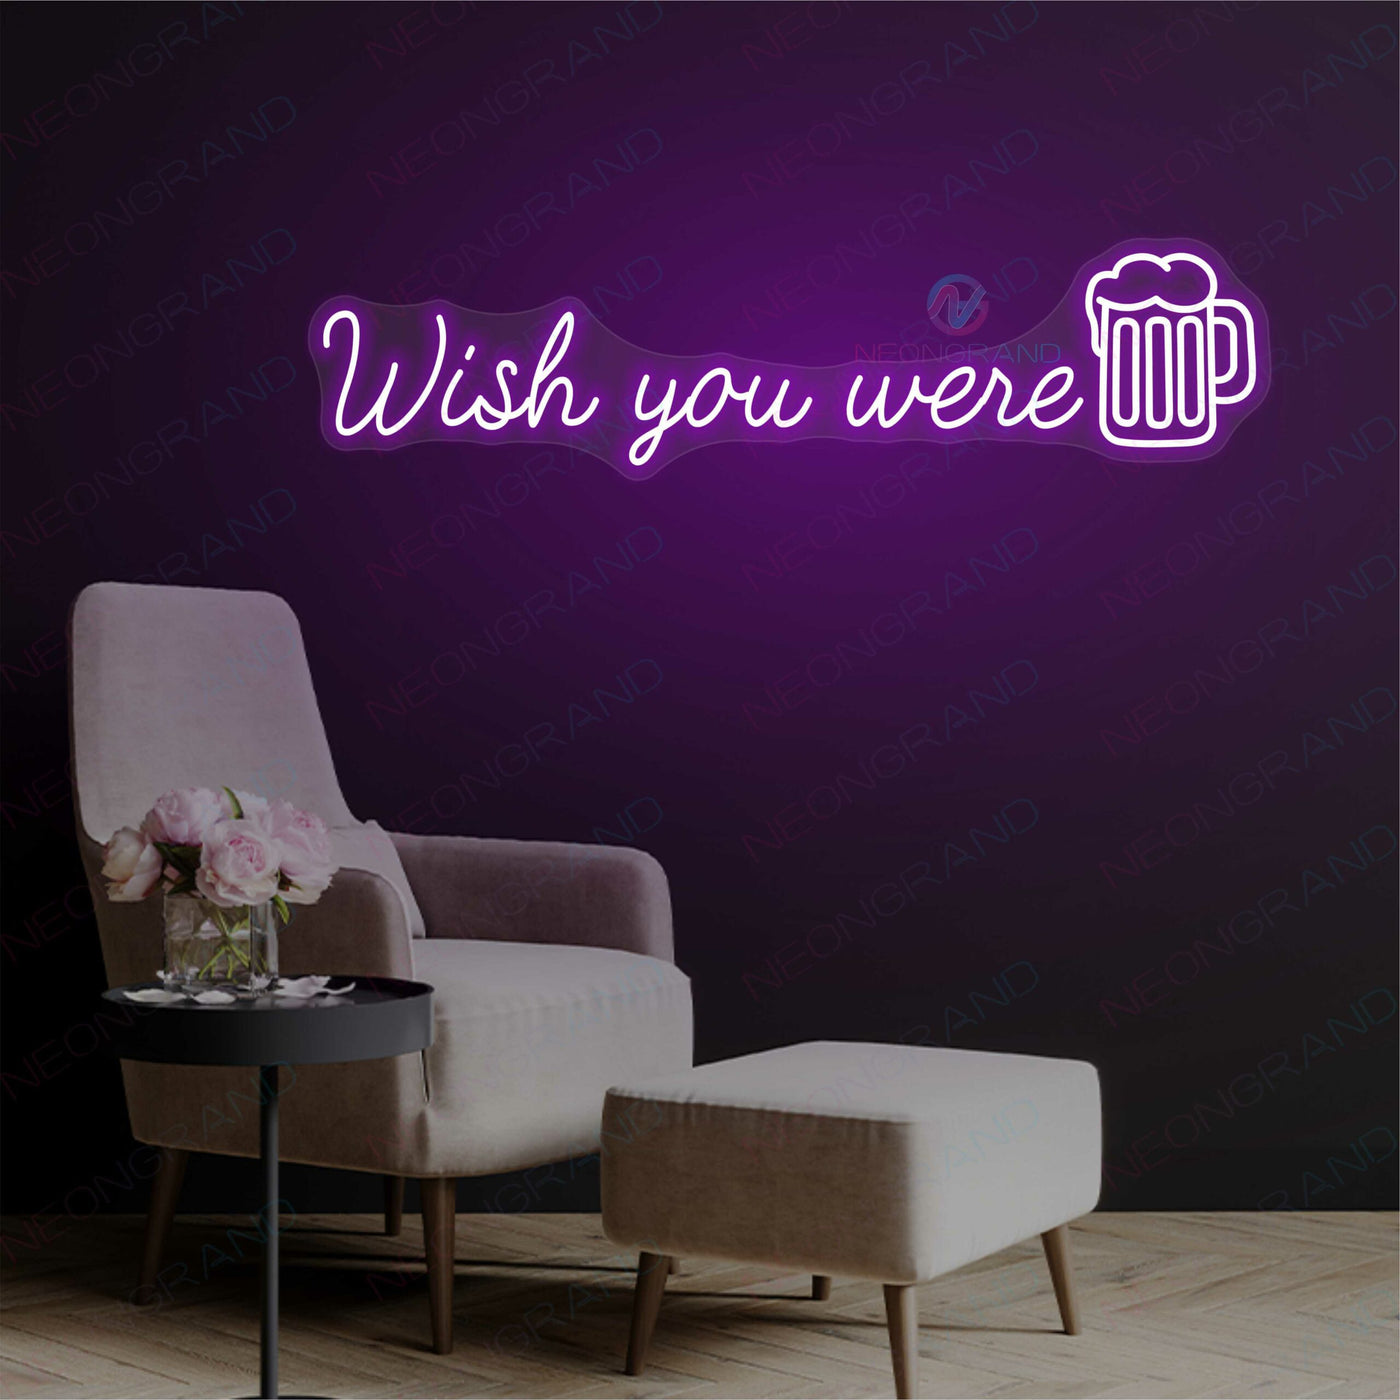 Beer Neon Signs Wish You Were Beer Drinking Led Light PURPLE